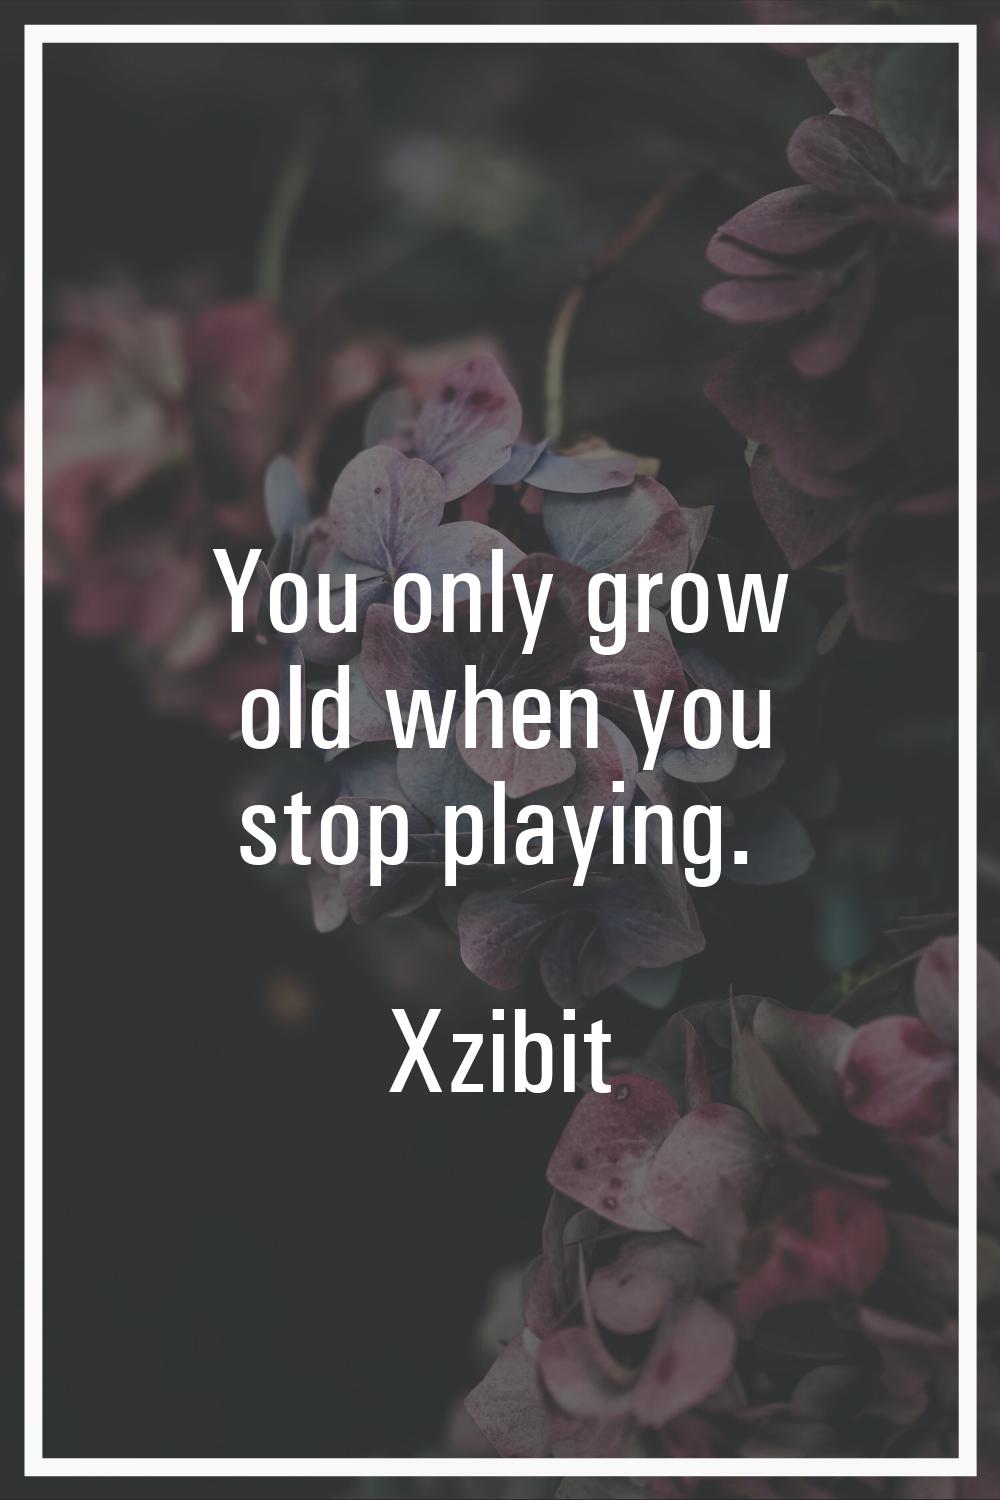 You only grow old when you stop playing.